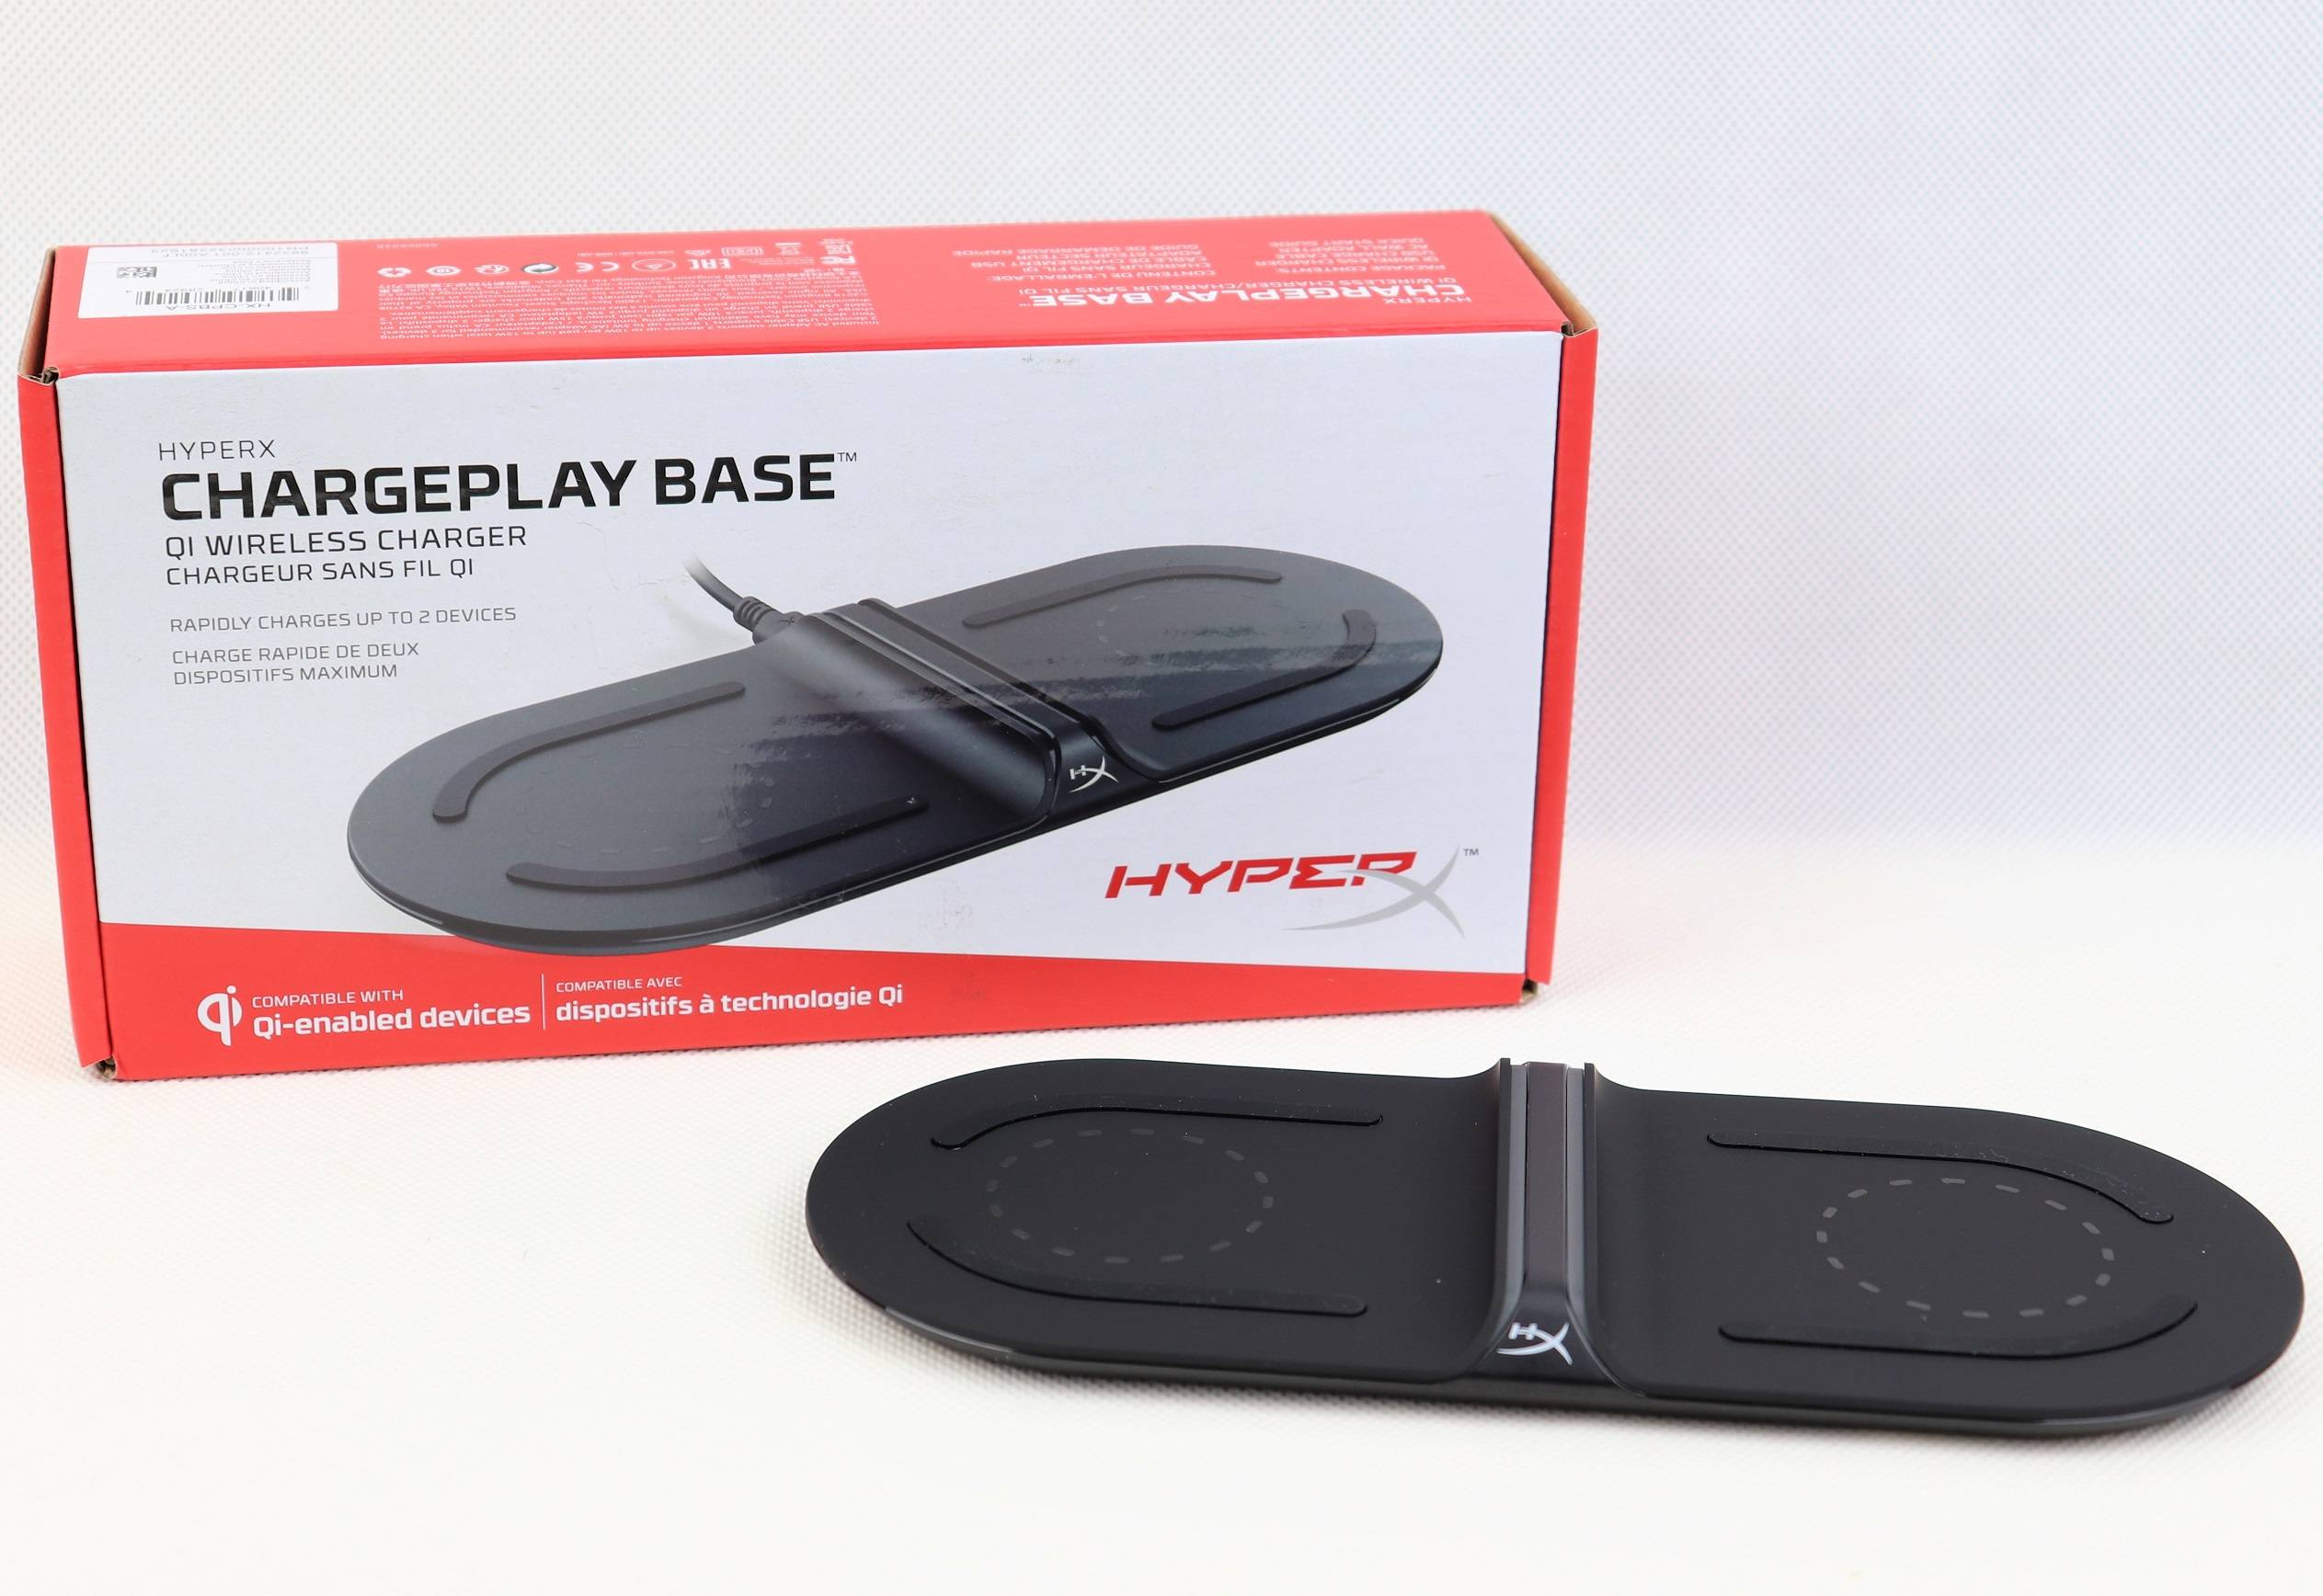 HyperX ChargePlay Base Qi Wireless Charger